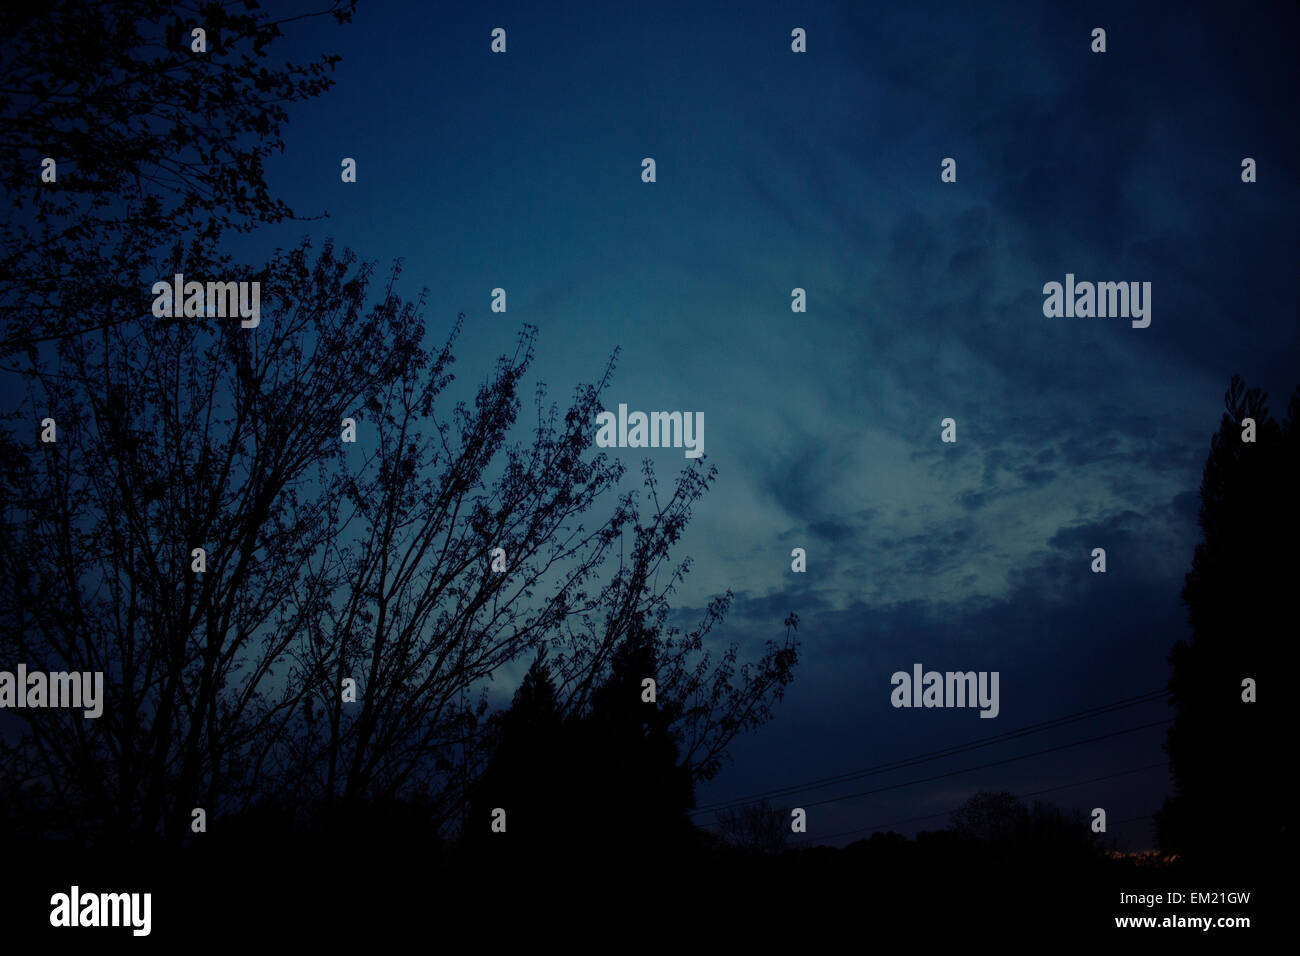 A beautiful ocean blue night sky with dark silhouettes of trees. Stock Photo